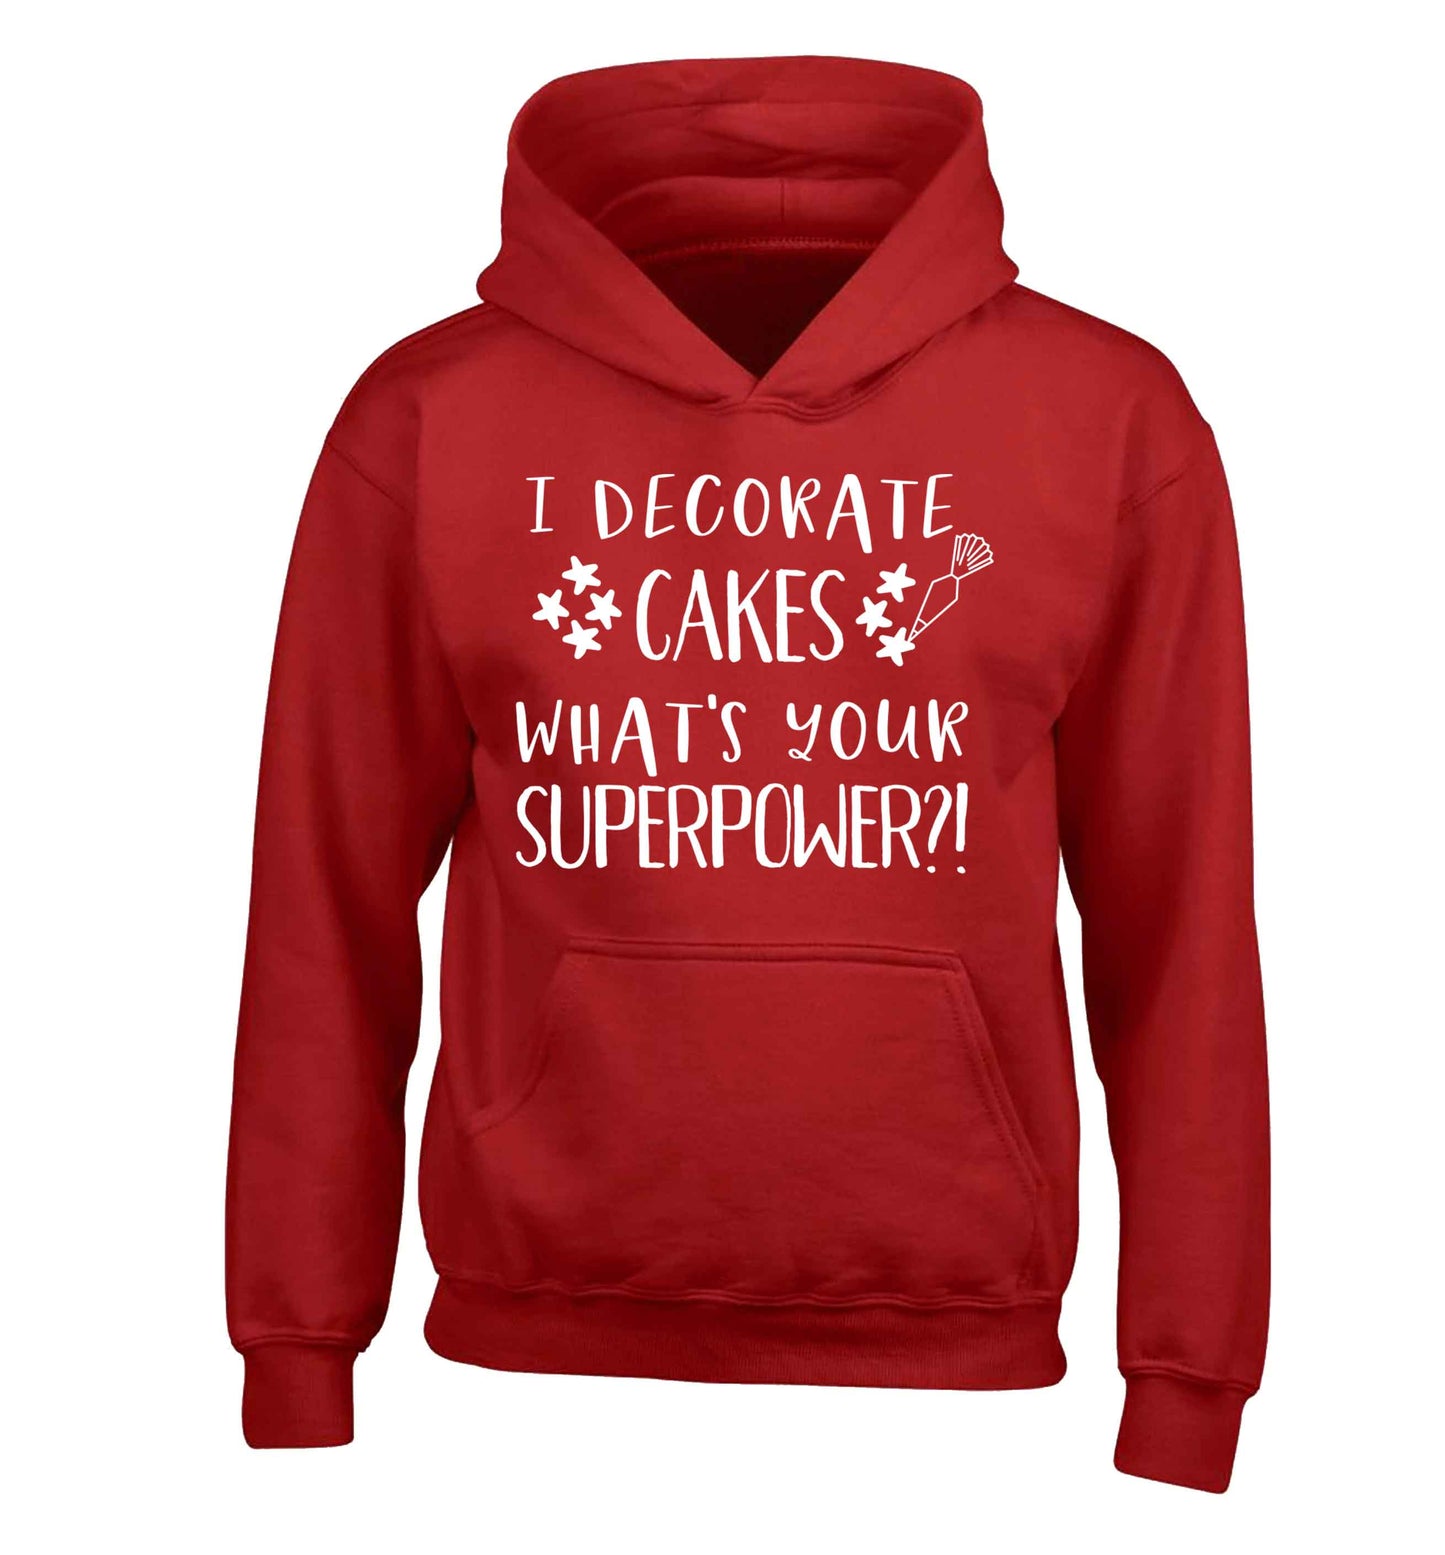 I decorate cakes what's your superpower?! children's red hoodie 12-13 Years